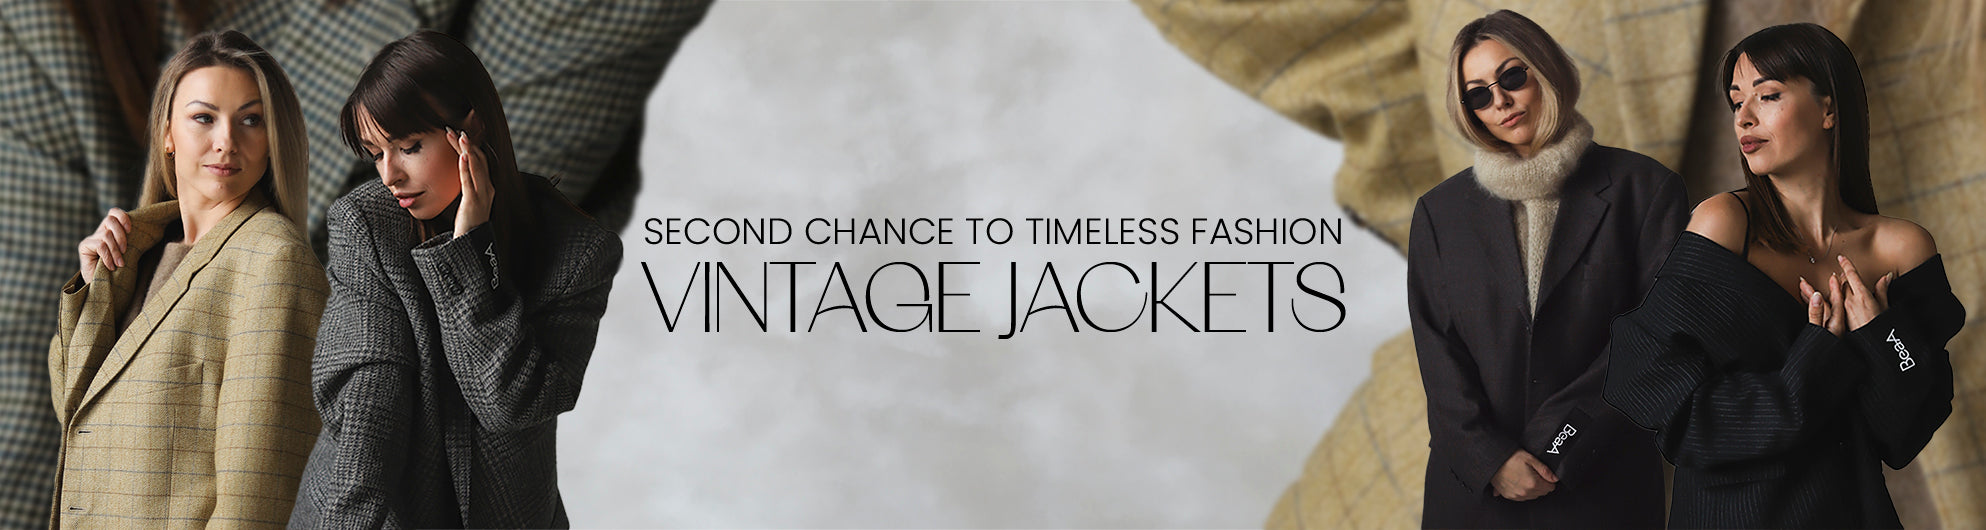 Revive your style with vintage jackets